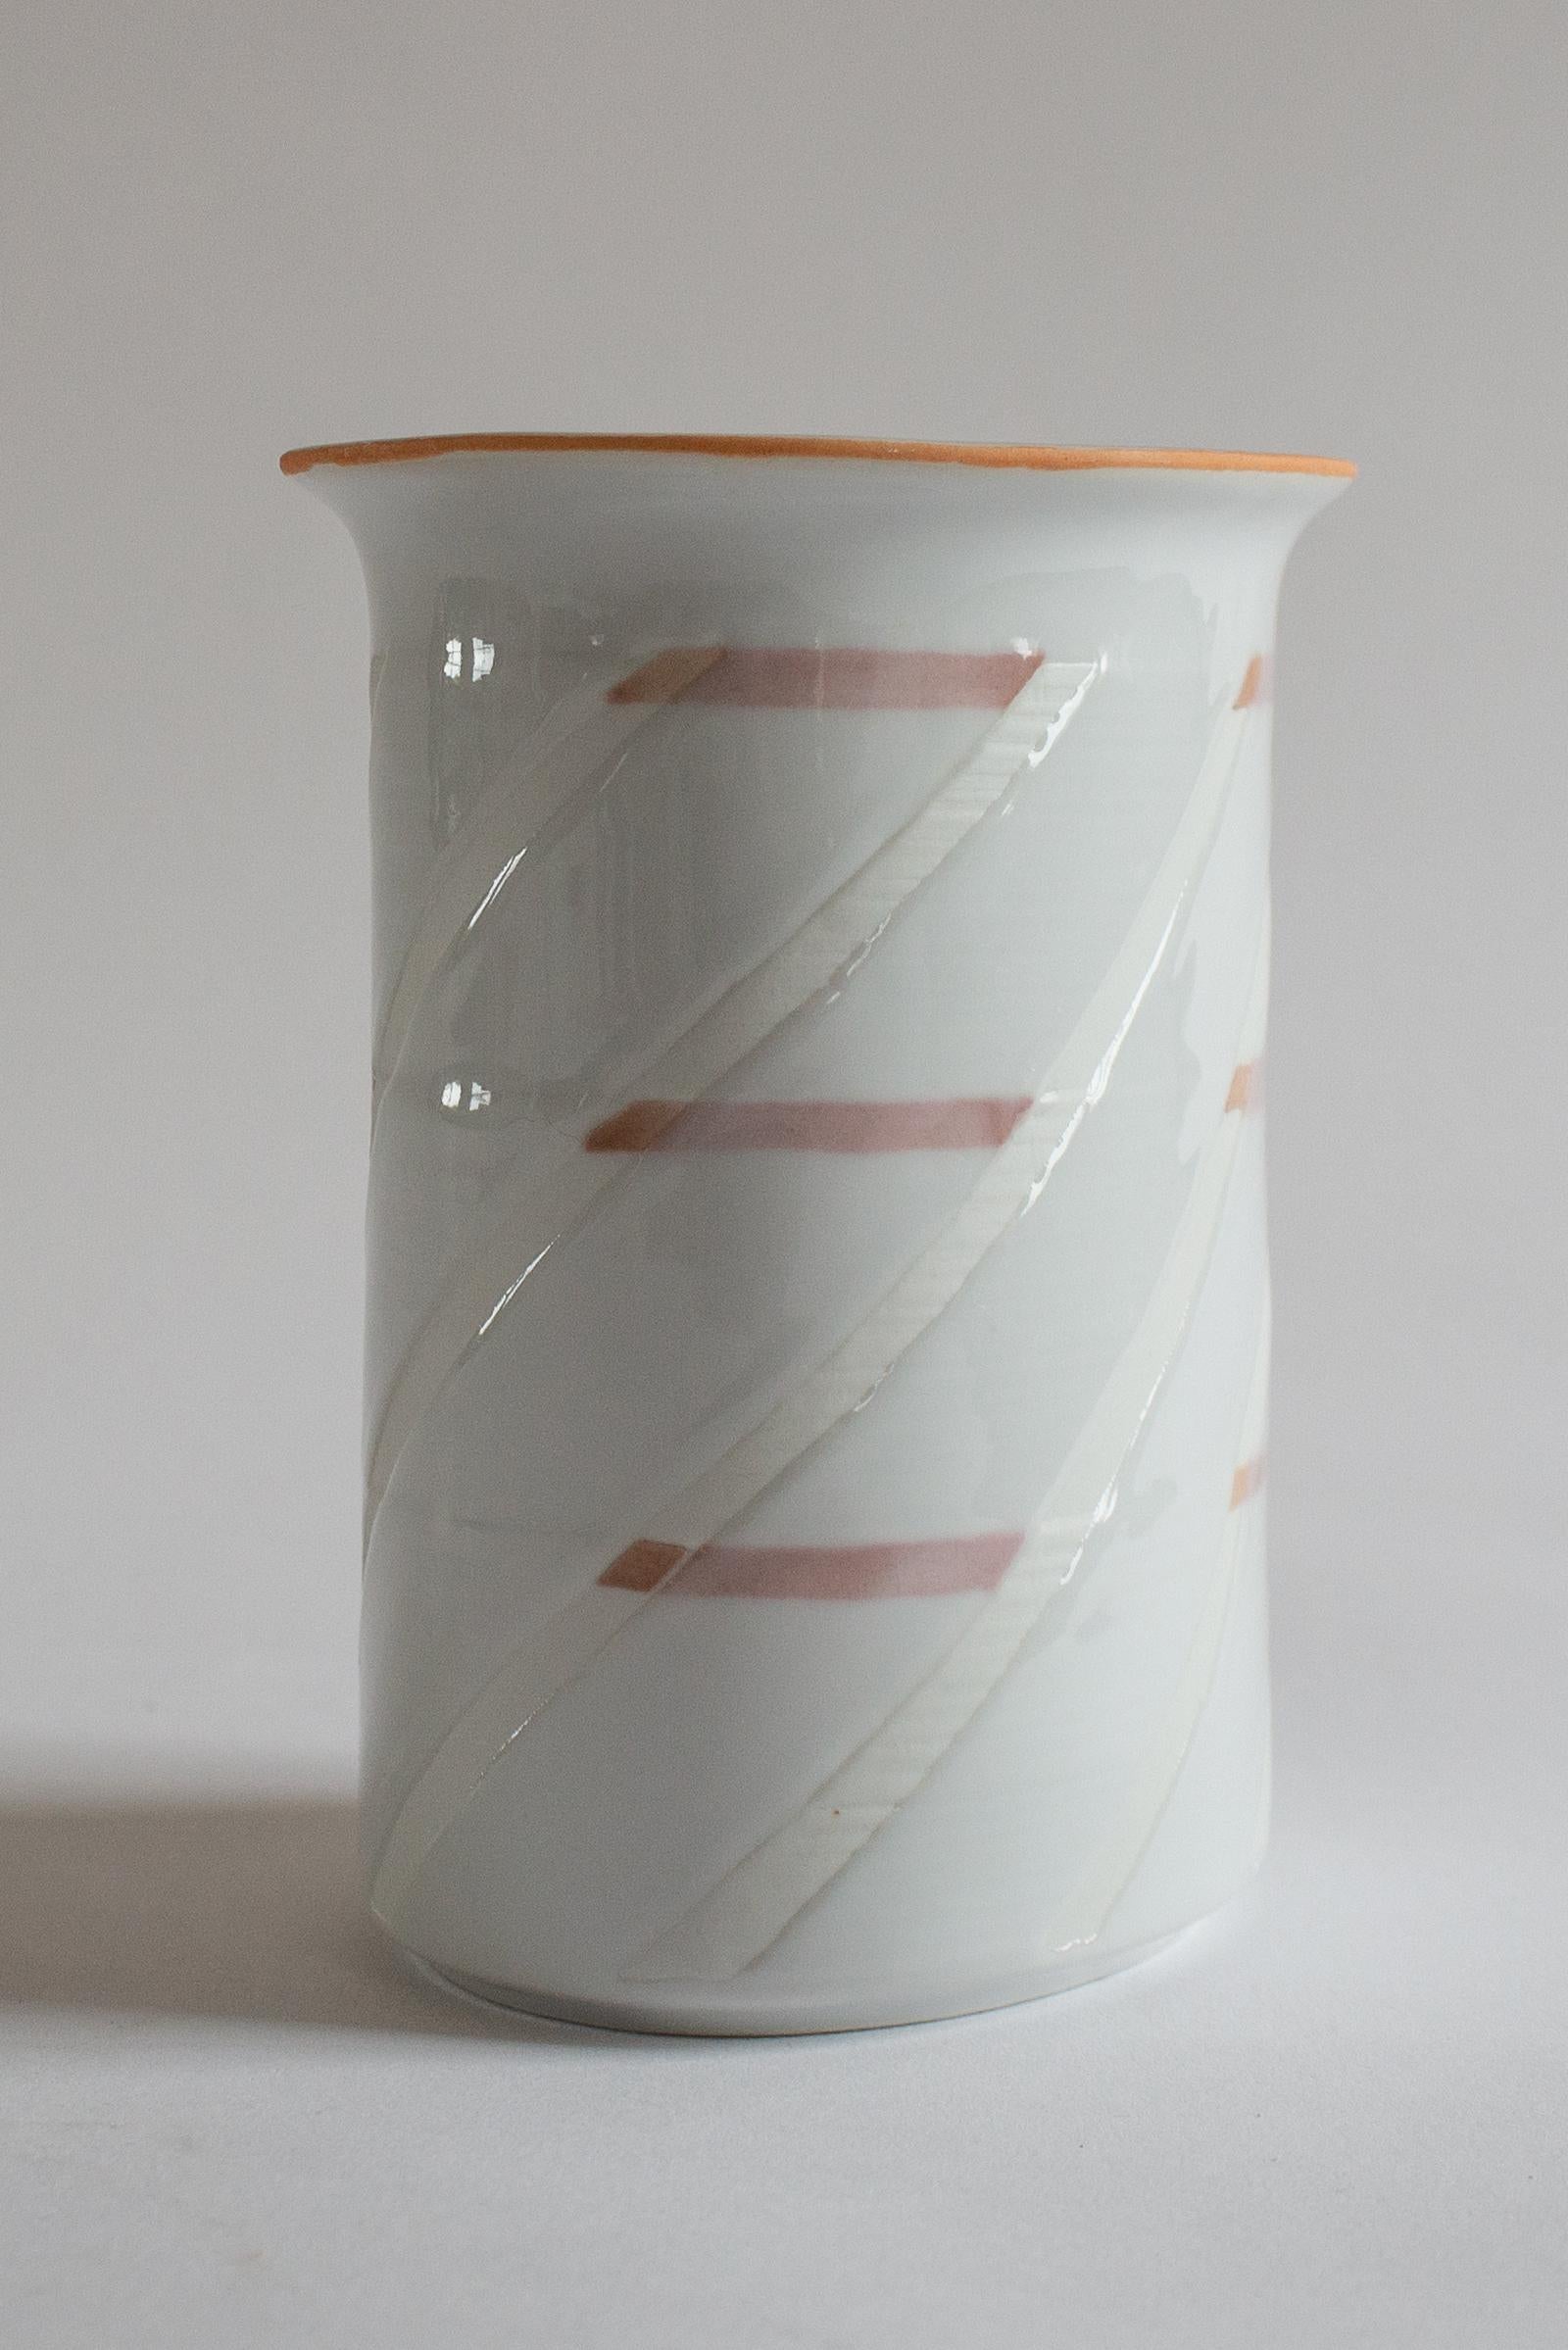 Danish Bodil Manz Vase for Bing And Grøndahl. Signed and stamped 6/84. For Sale